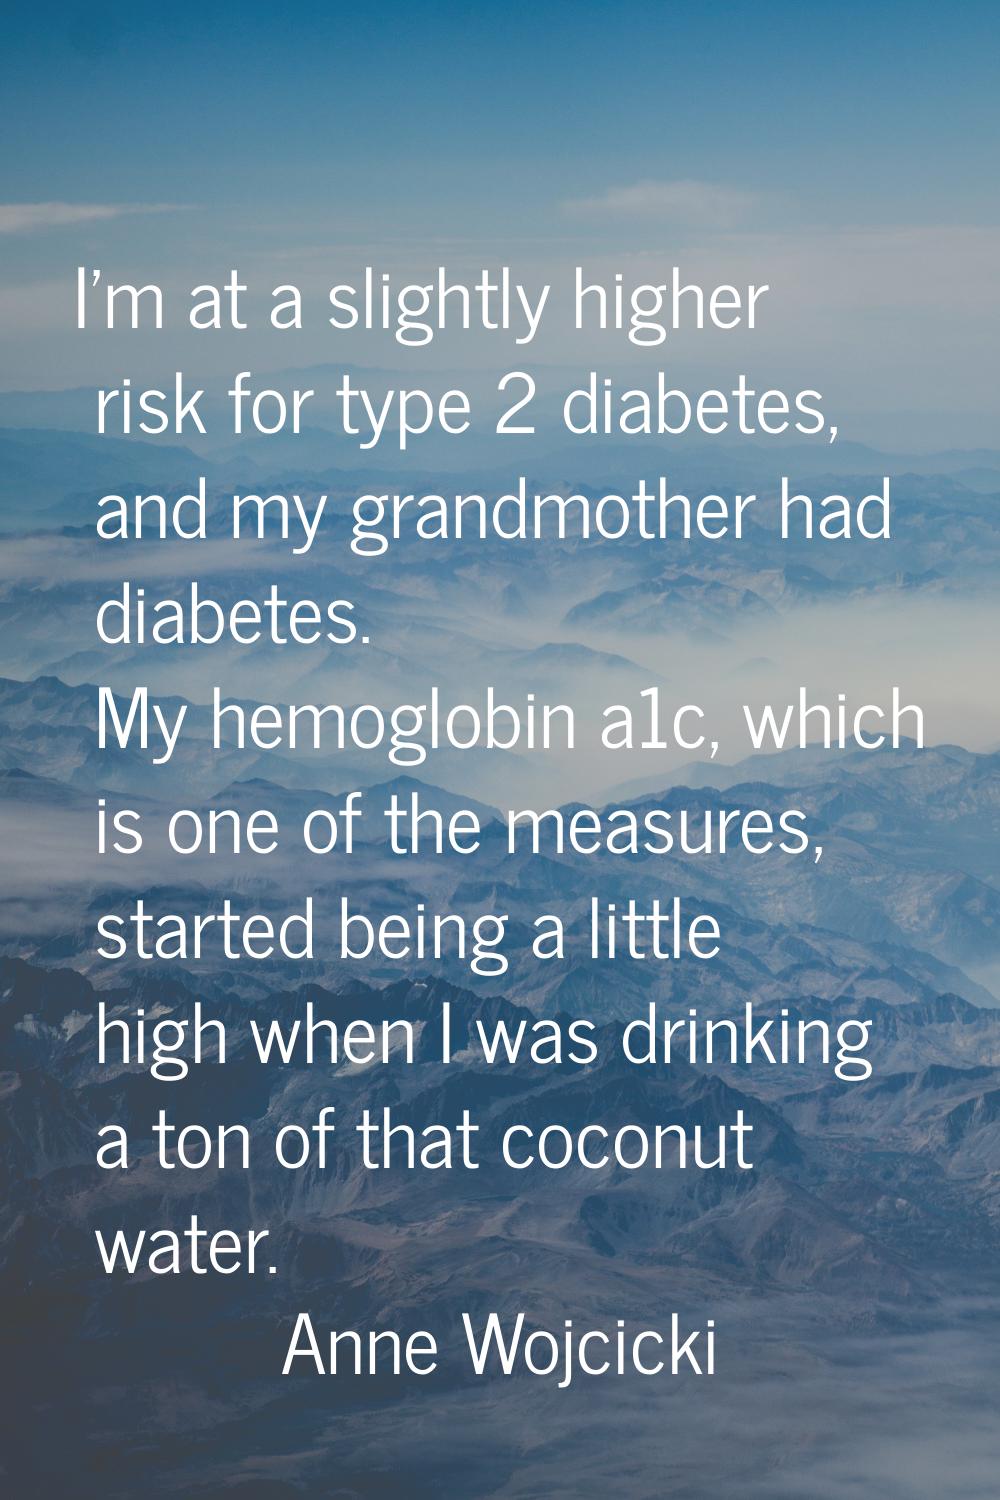 I'm at a slightly higher risk for type 2 diabetes, and my grandmother had diabetes. My hemoglobin a